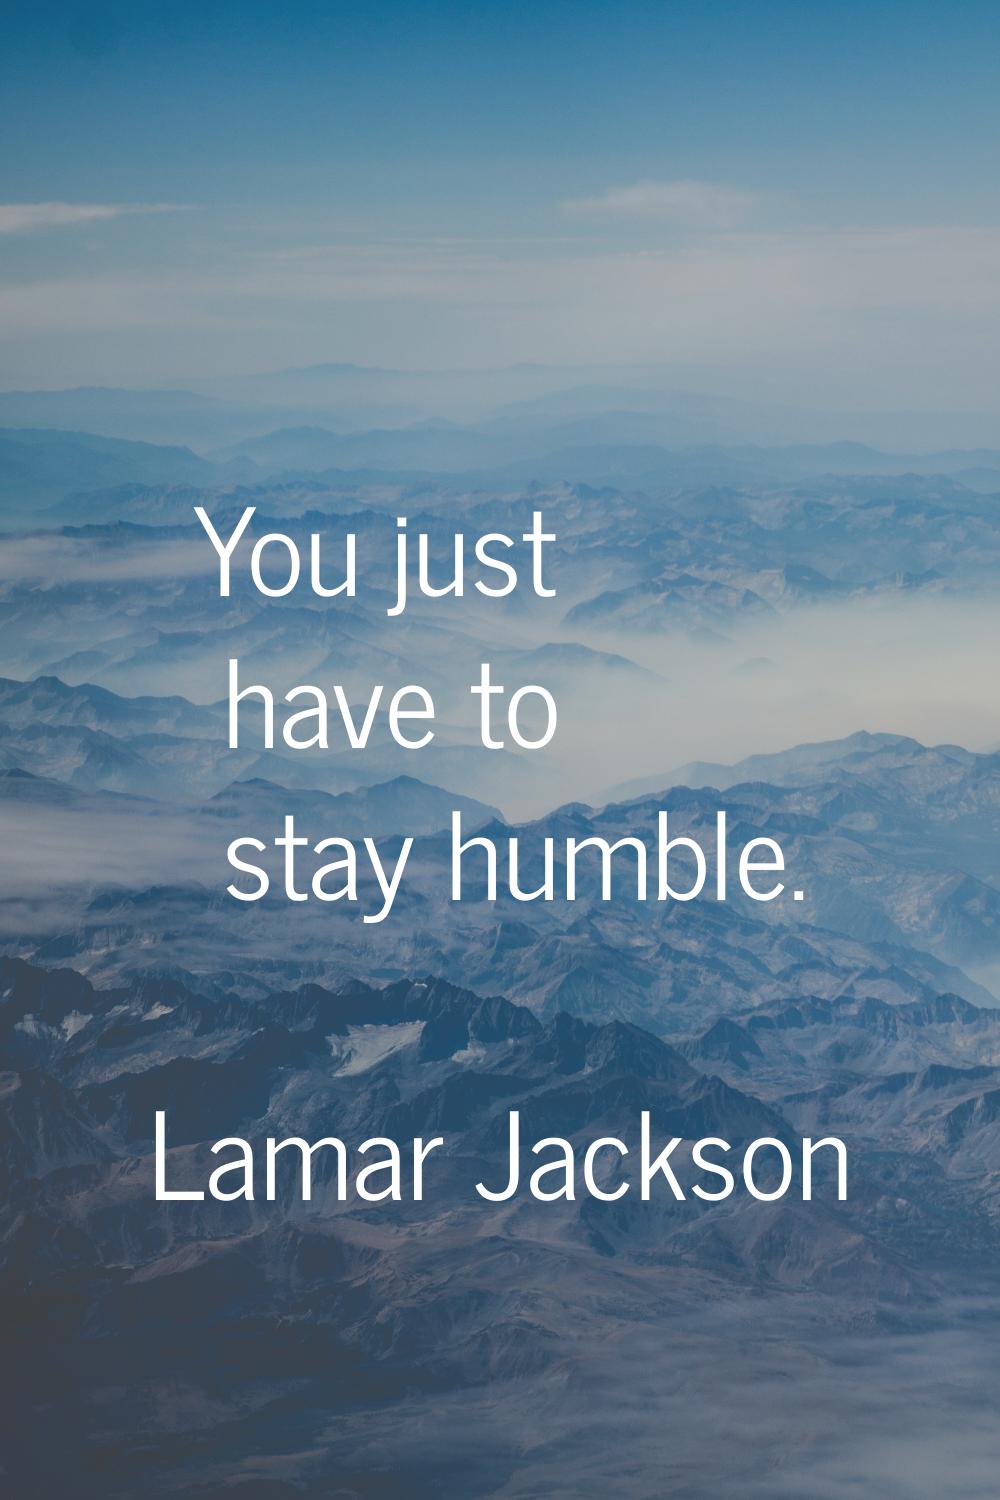 You just have to stay humble.